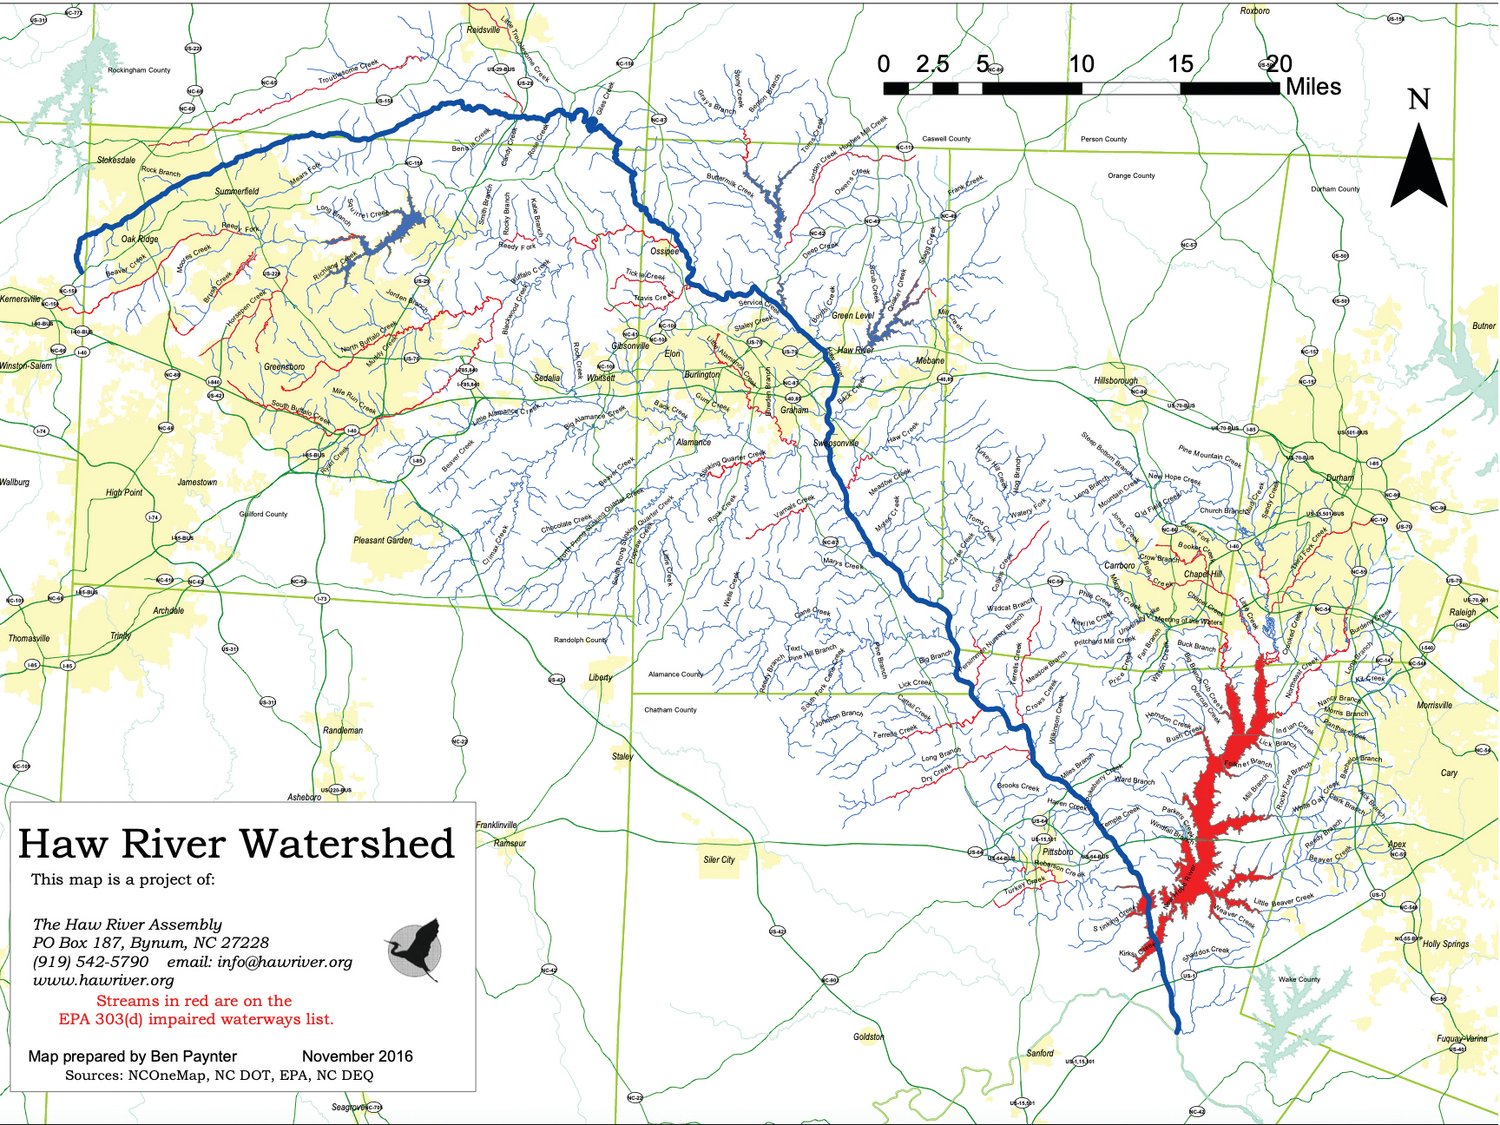 This map shows the Haw River Watershed and its flow through Chatham County.